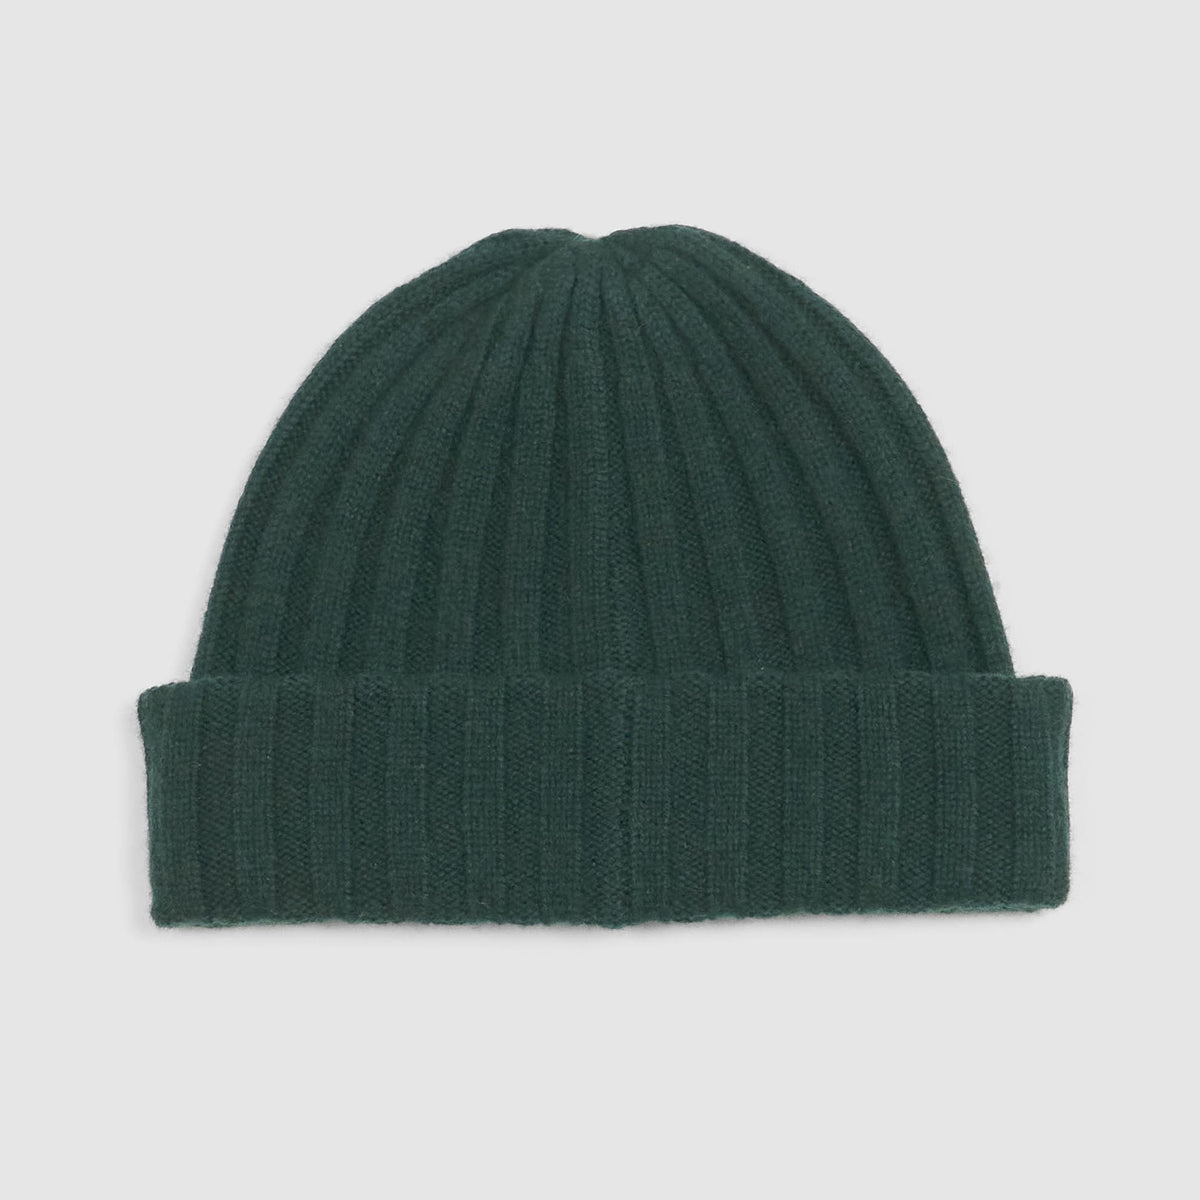 Stetson Knitted Cashmere Beanie